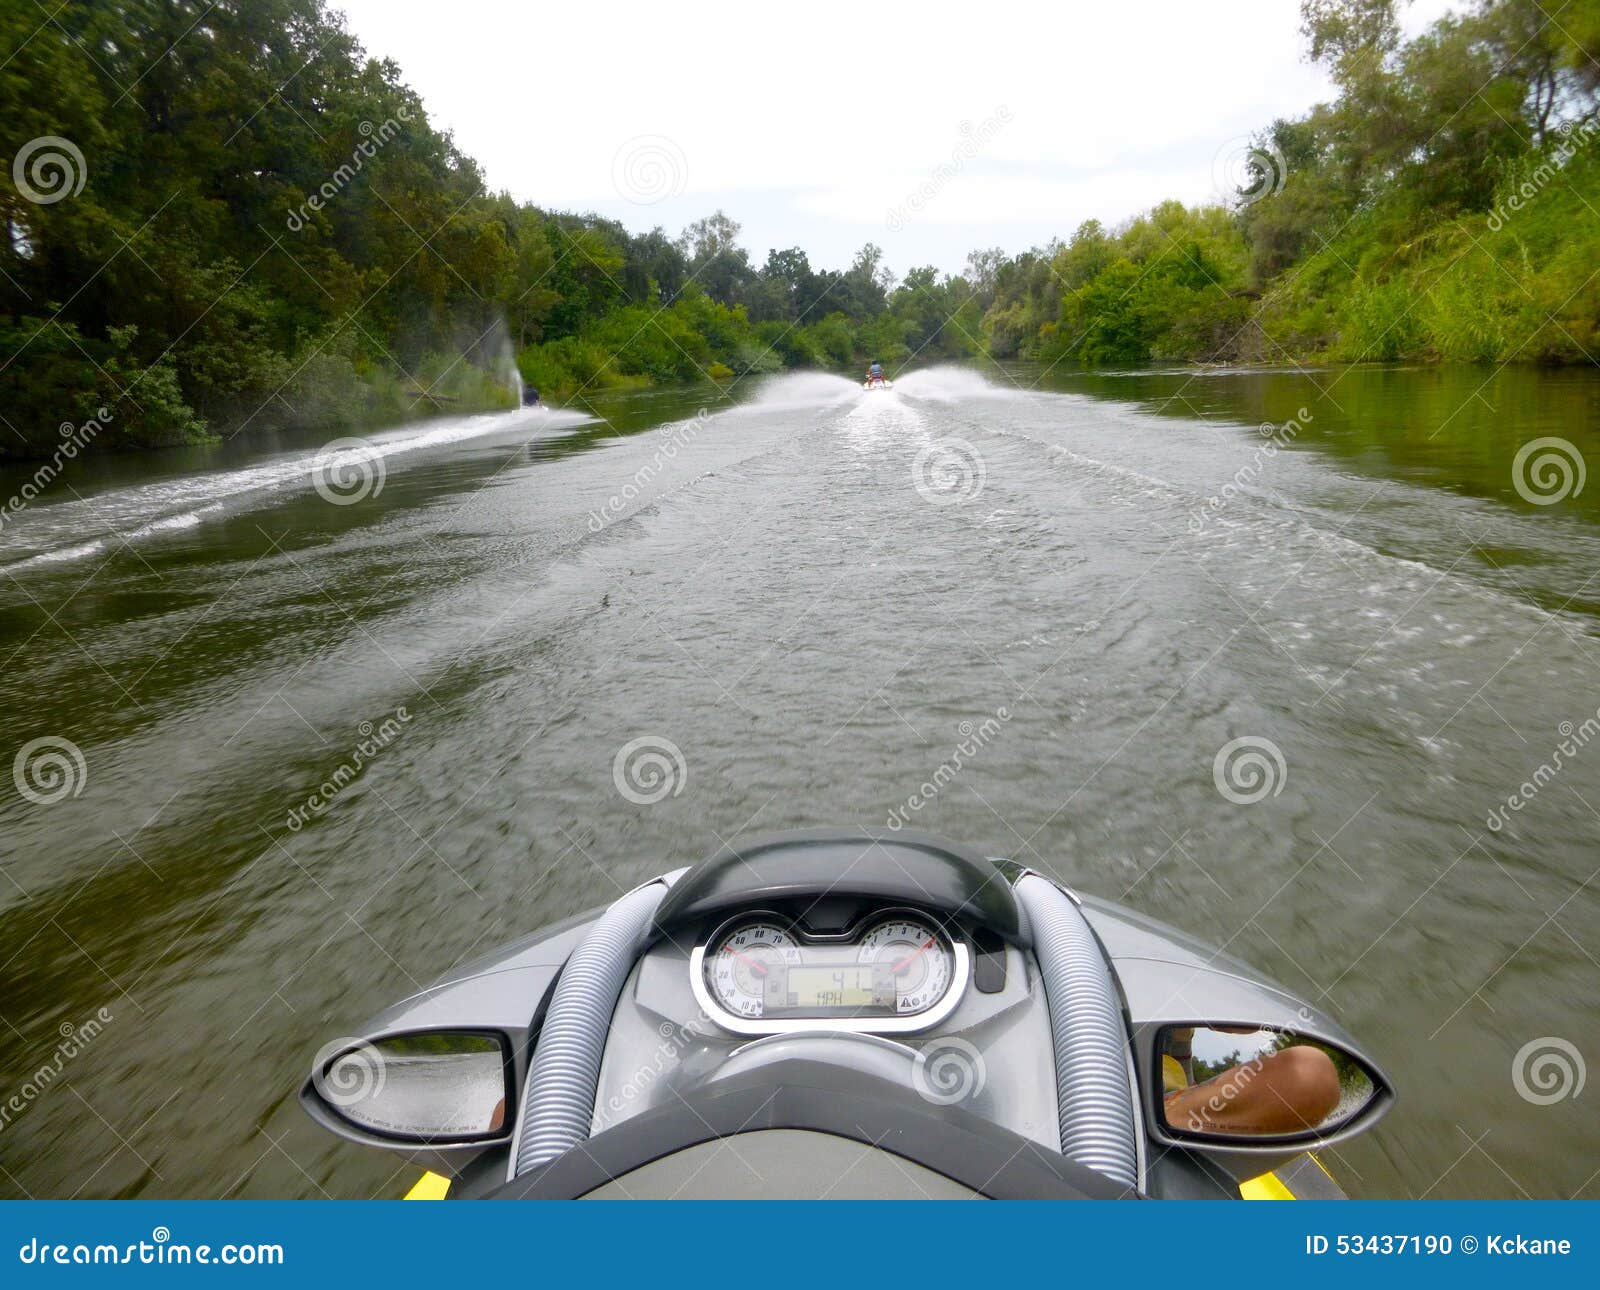 personal watercraft riding on the kings river